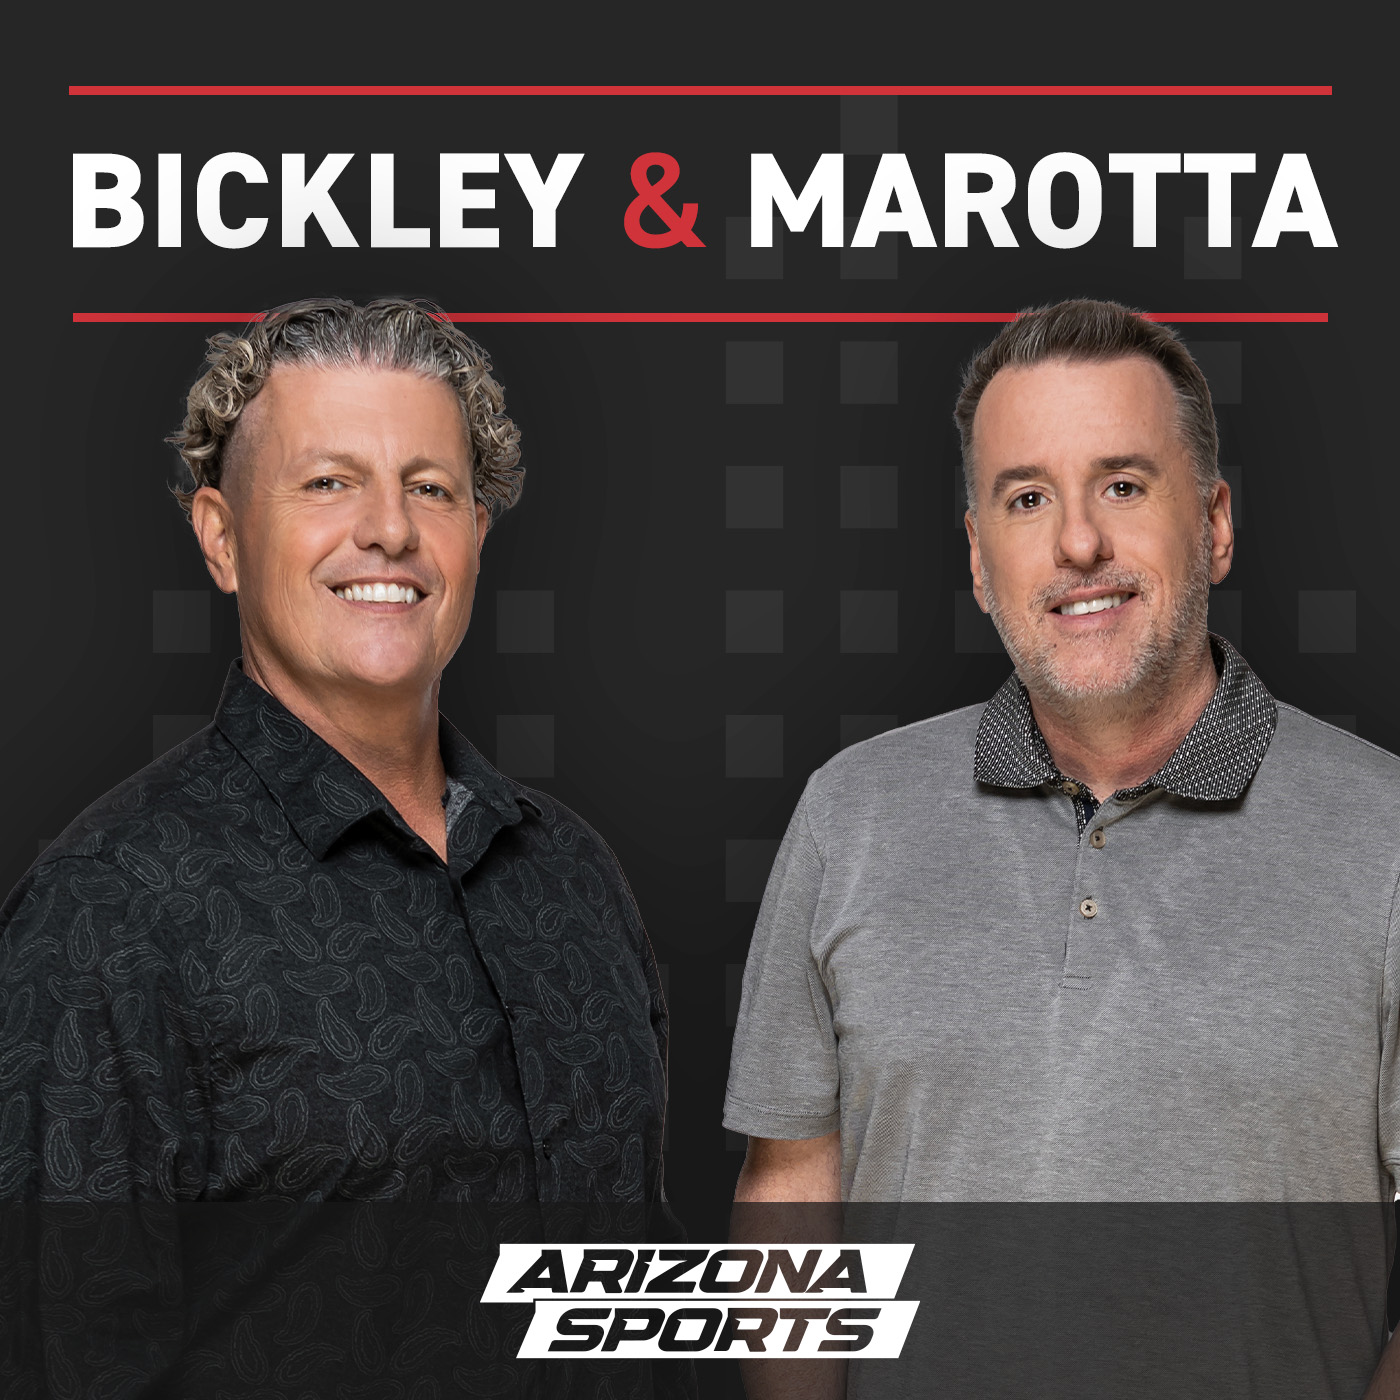 Bickley&Marotta react to Kyler Murray's claim he will be back soon